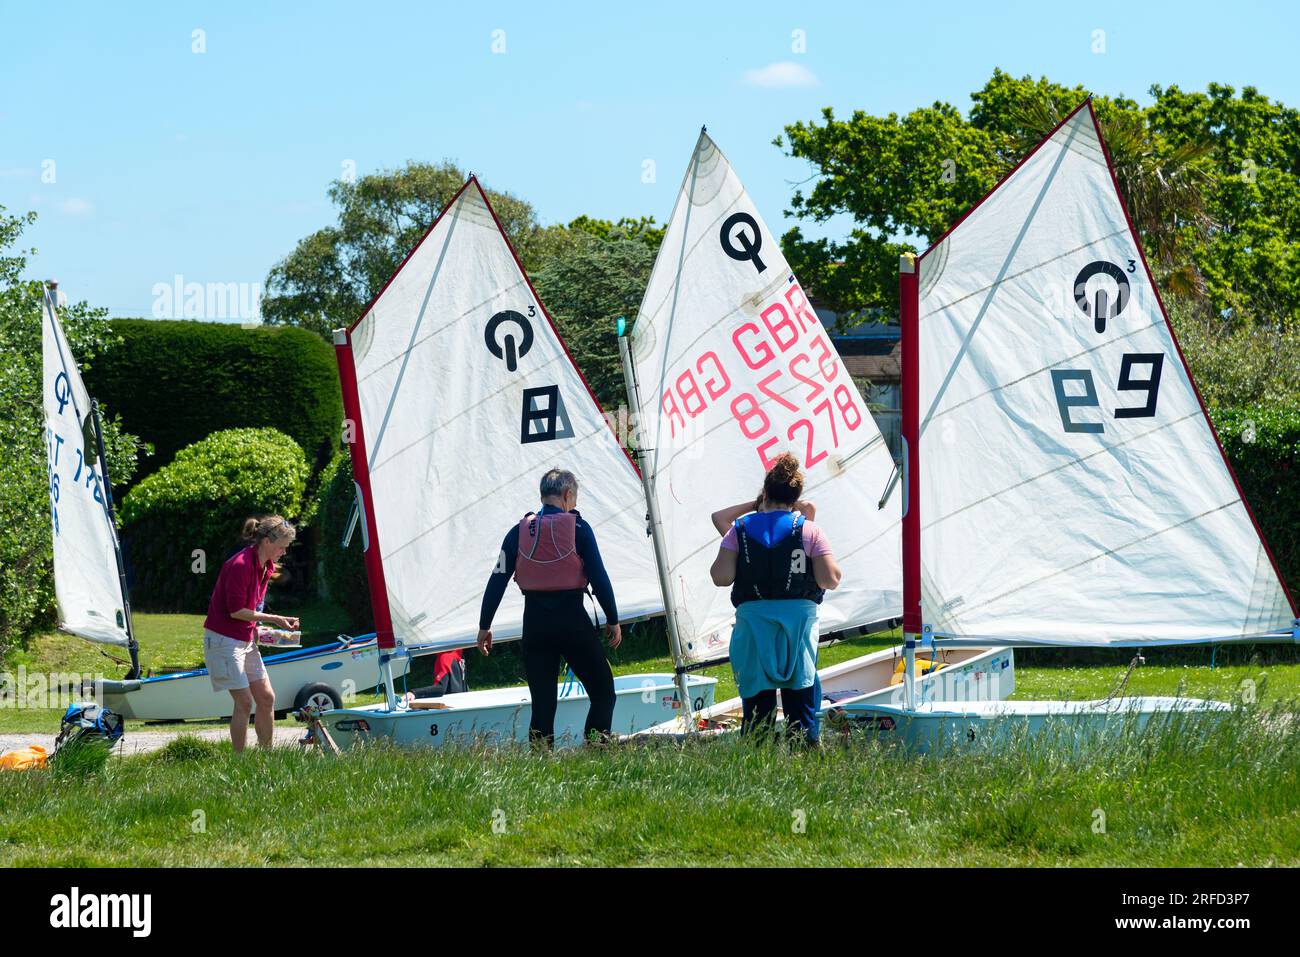 Optimist sailing dinghies preparing to be sailed at the West Wittering Sailing Club, Snowhill, near Chichester, West Sussex, England Stock Photo